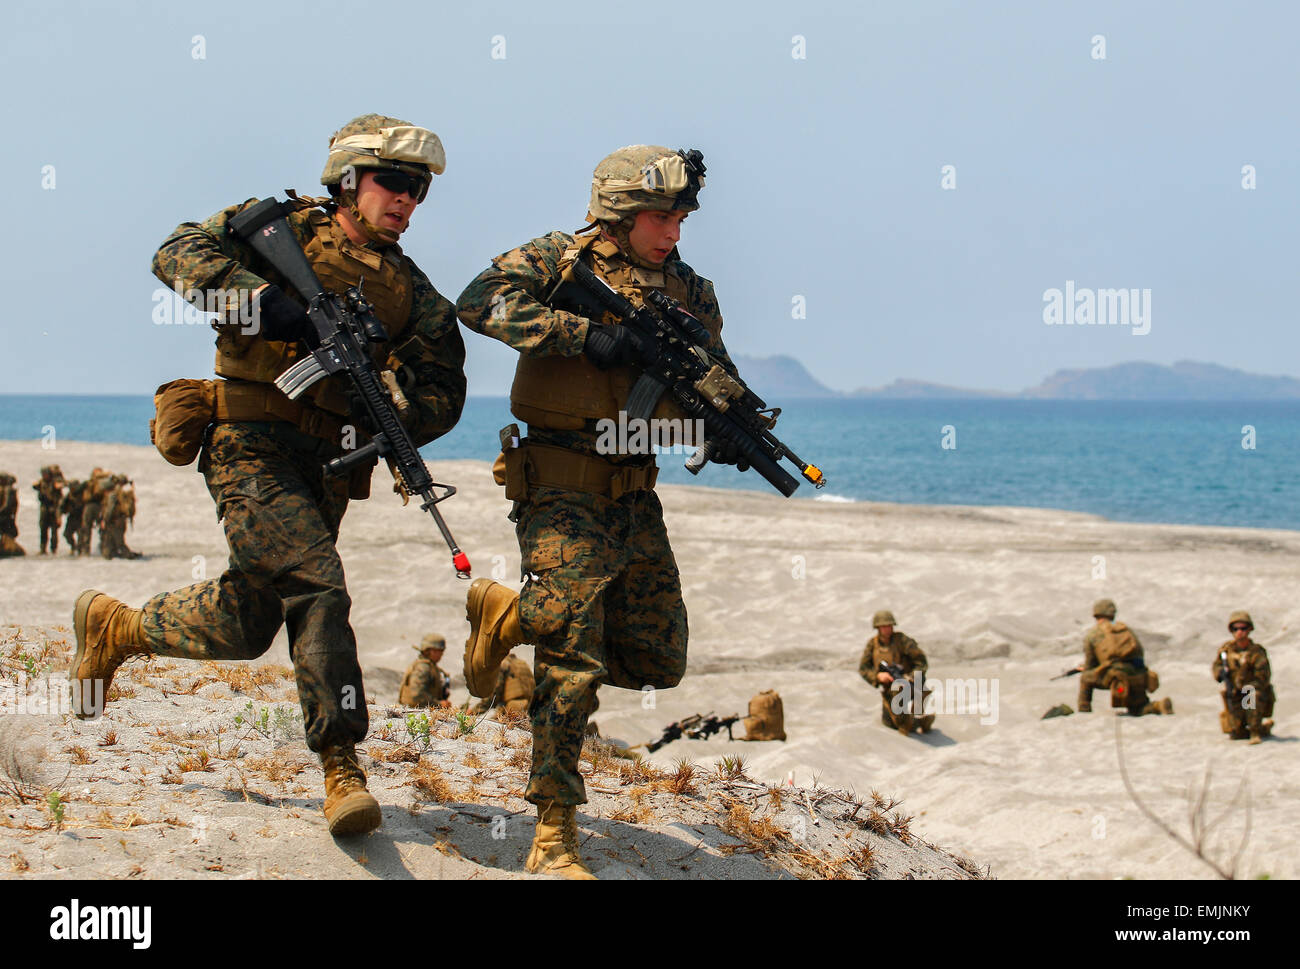 US Marines run down a beach during joint amphibious landing with Philippine and U.S. forces on North Beach at the Naval Education Training Center April 21, 2015 in Zambales, Philippines. The beach assault is part of exercise Balikatan 2015. Stock Photo